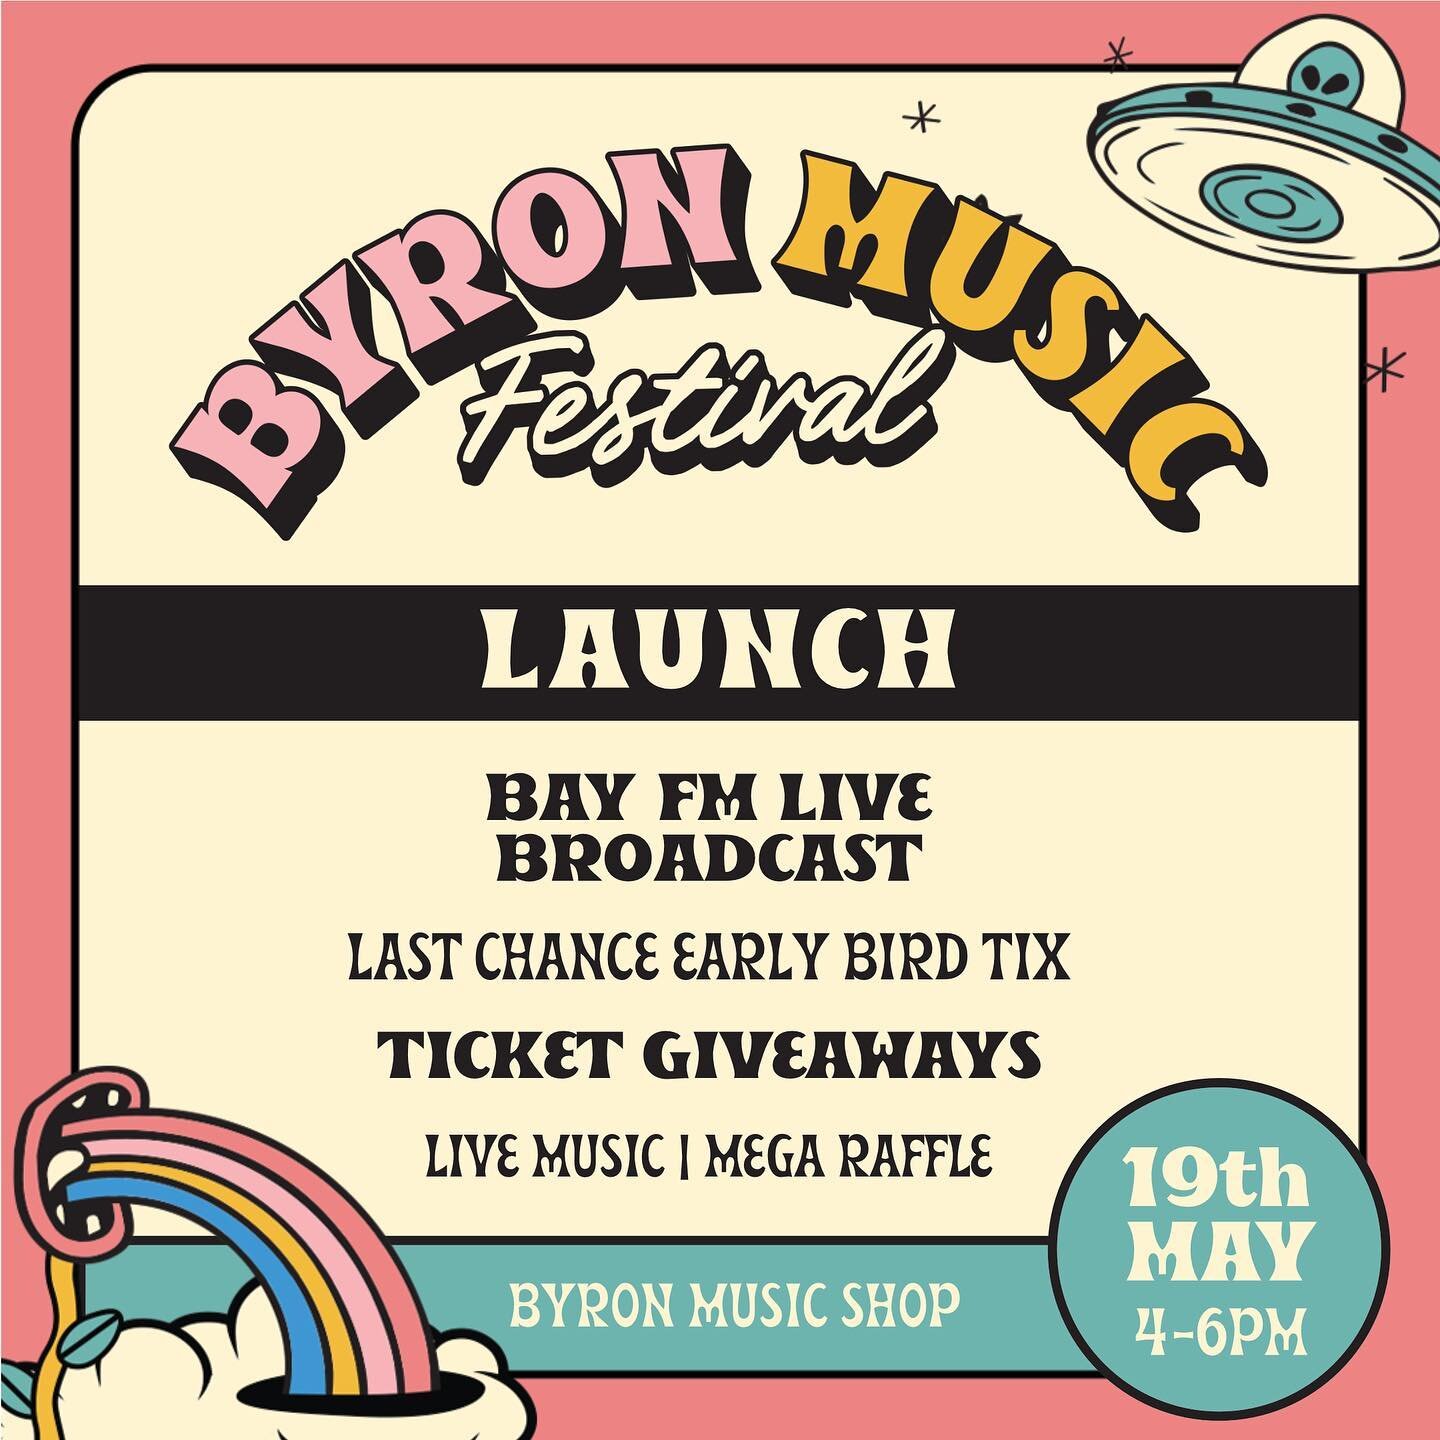 Next Friday the 19th May we're launching BMF at @byronmusicshop with a @bayfm99.9 live broadcast from 4-6pm. 
🎟️ last chance early bird tickets + ticket giveaways 
📻 Live Bay FM 99.9 broadcast 
🎙️Live music and interviews from some of the BMF line